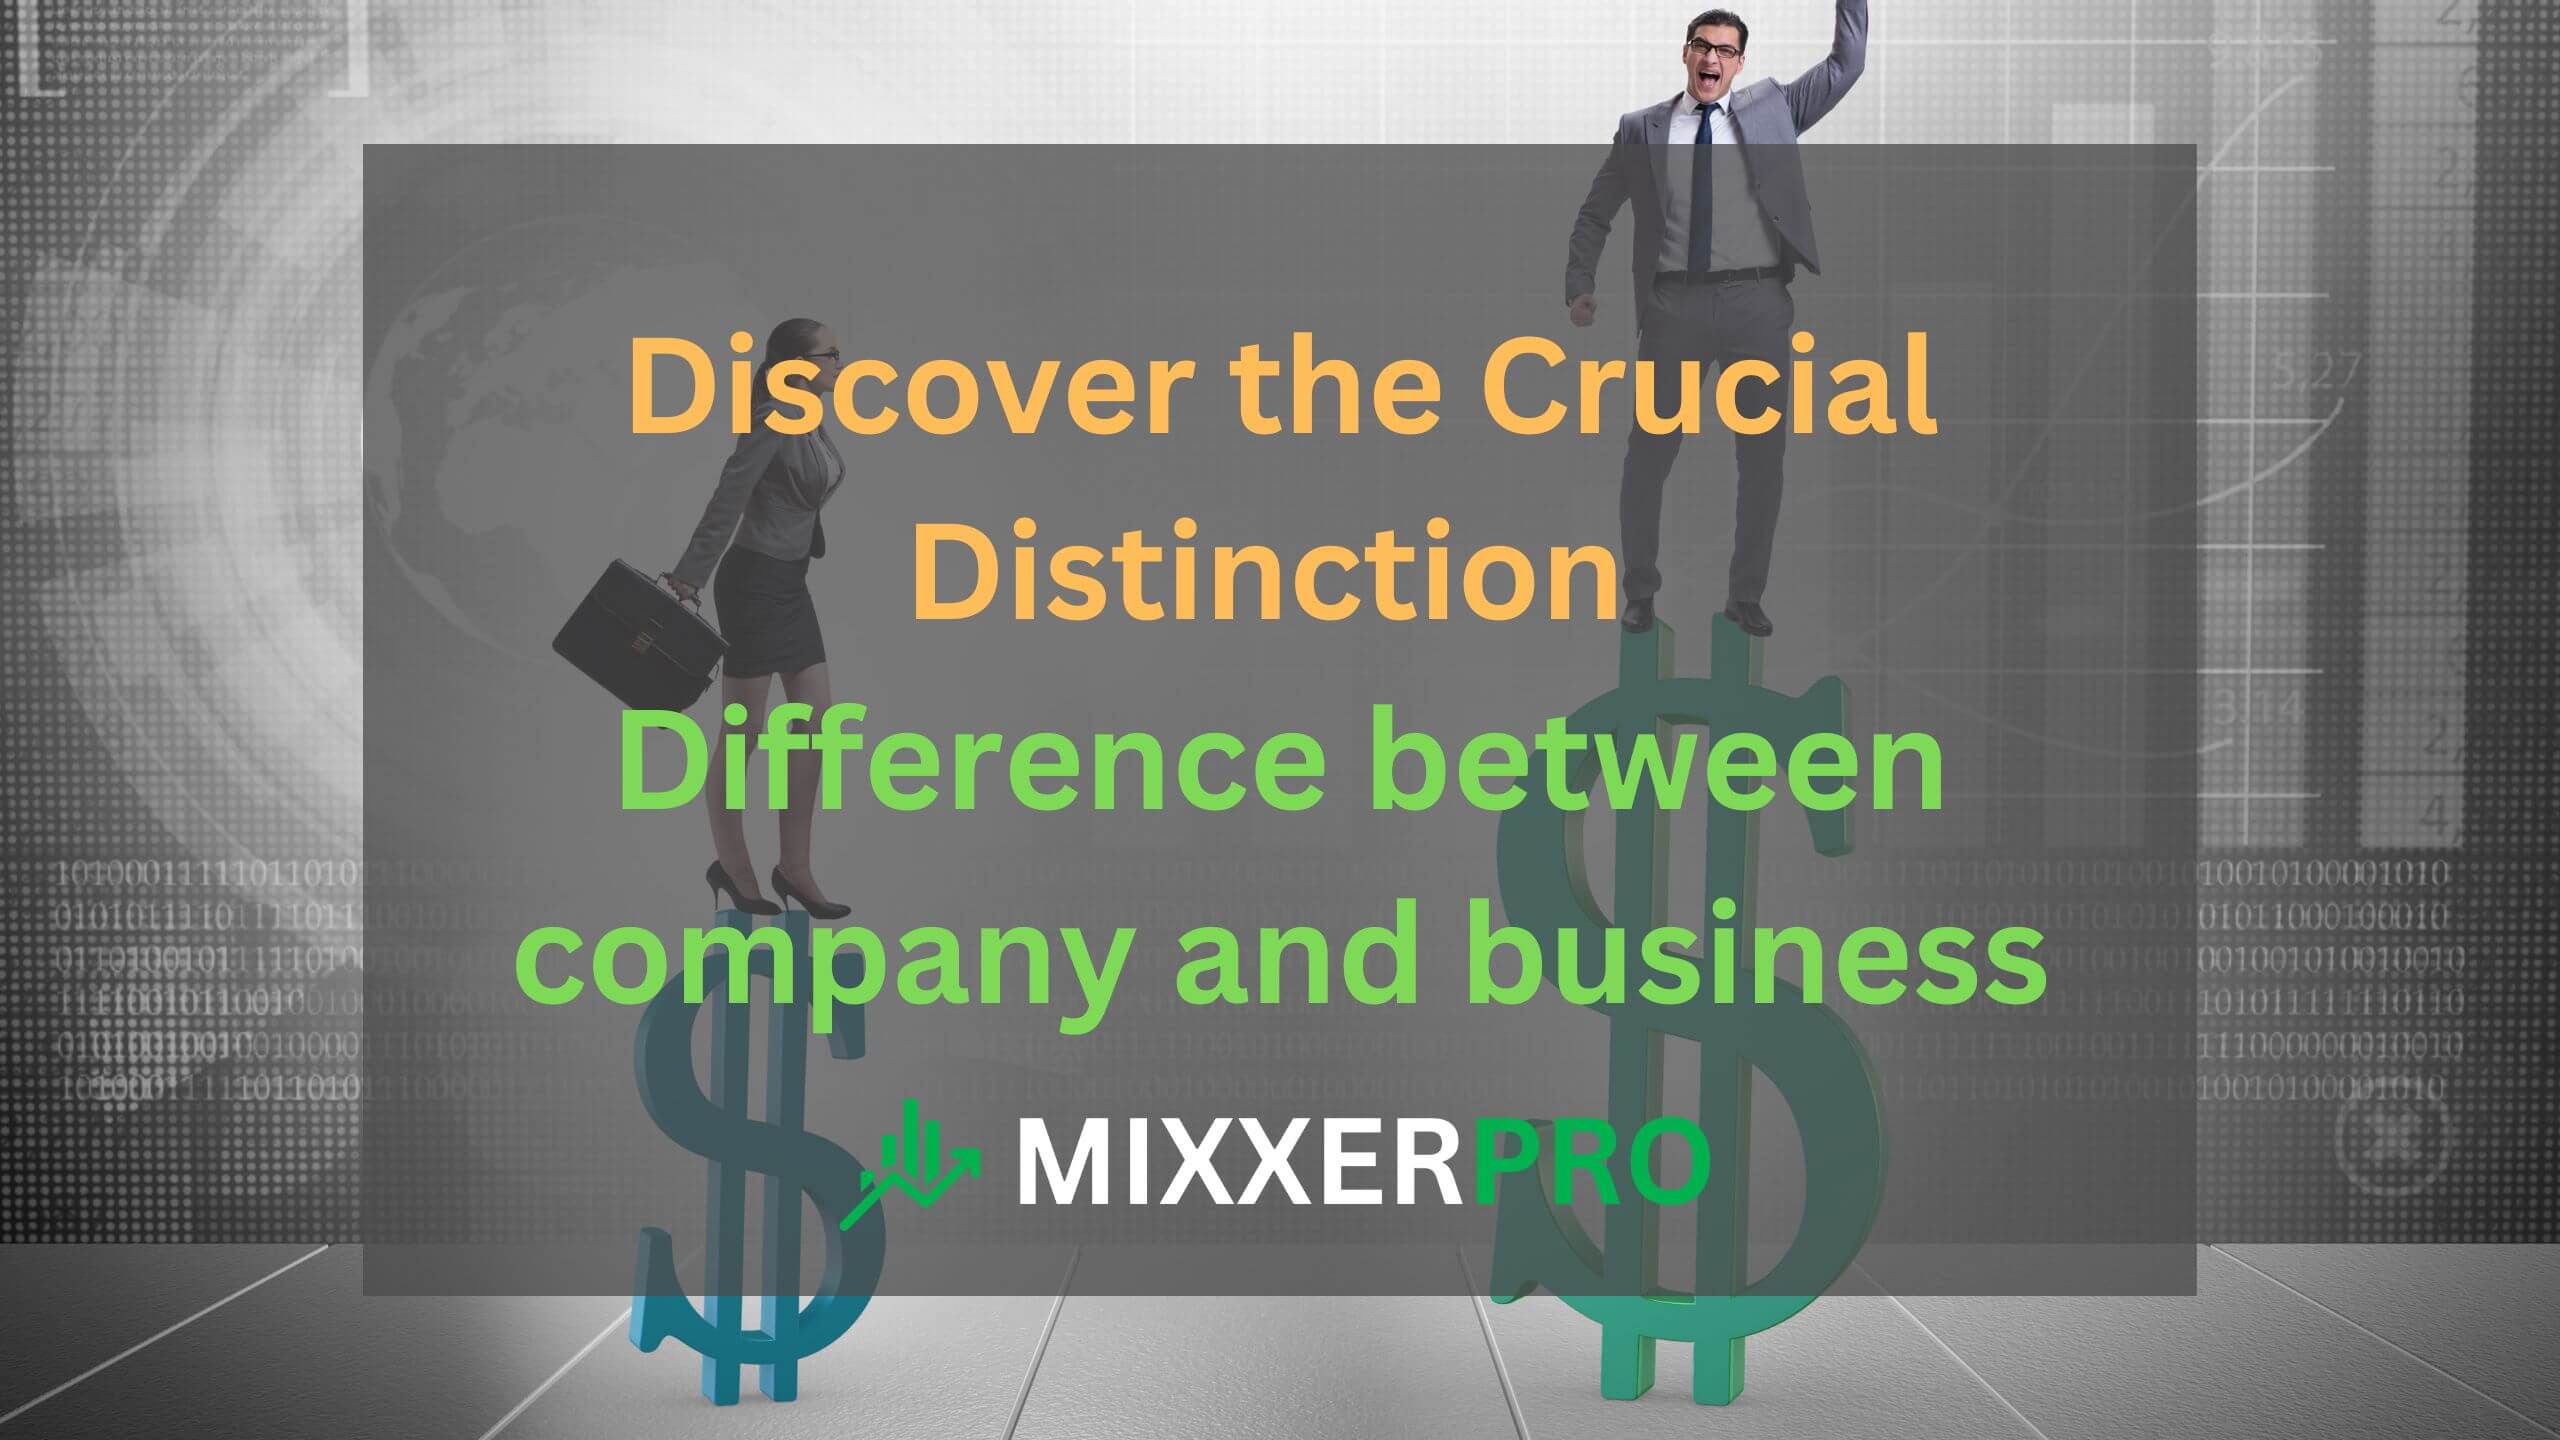 You are currently viewing Discover the Crucial Distinction difference between company and business